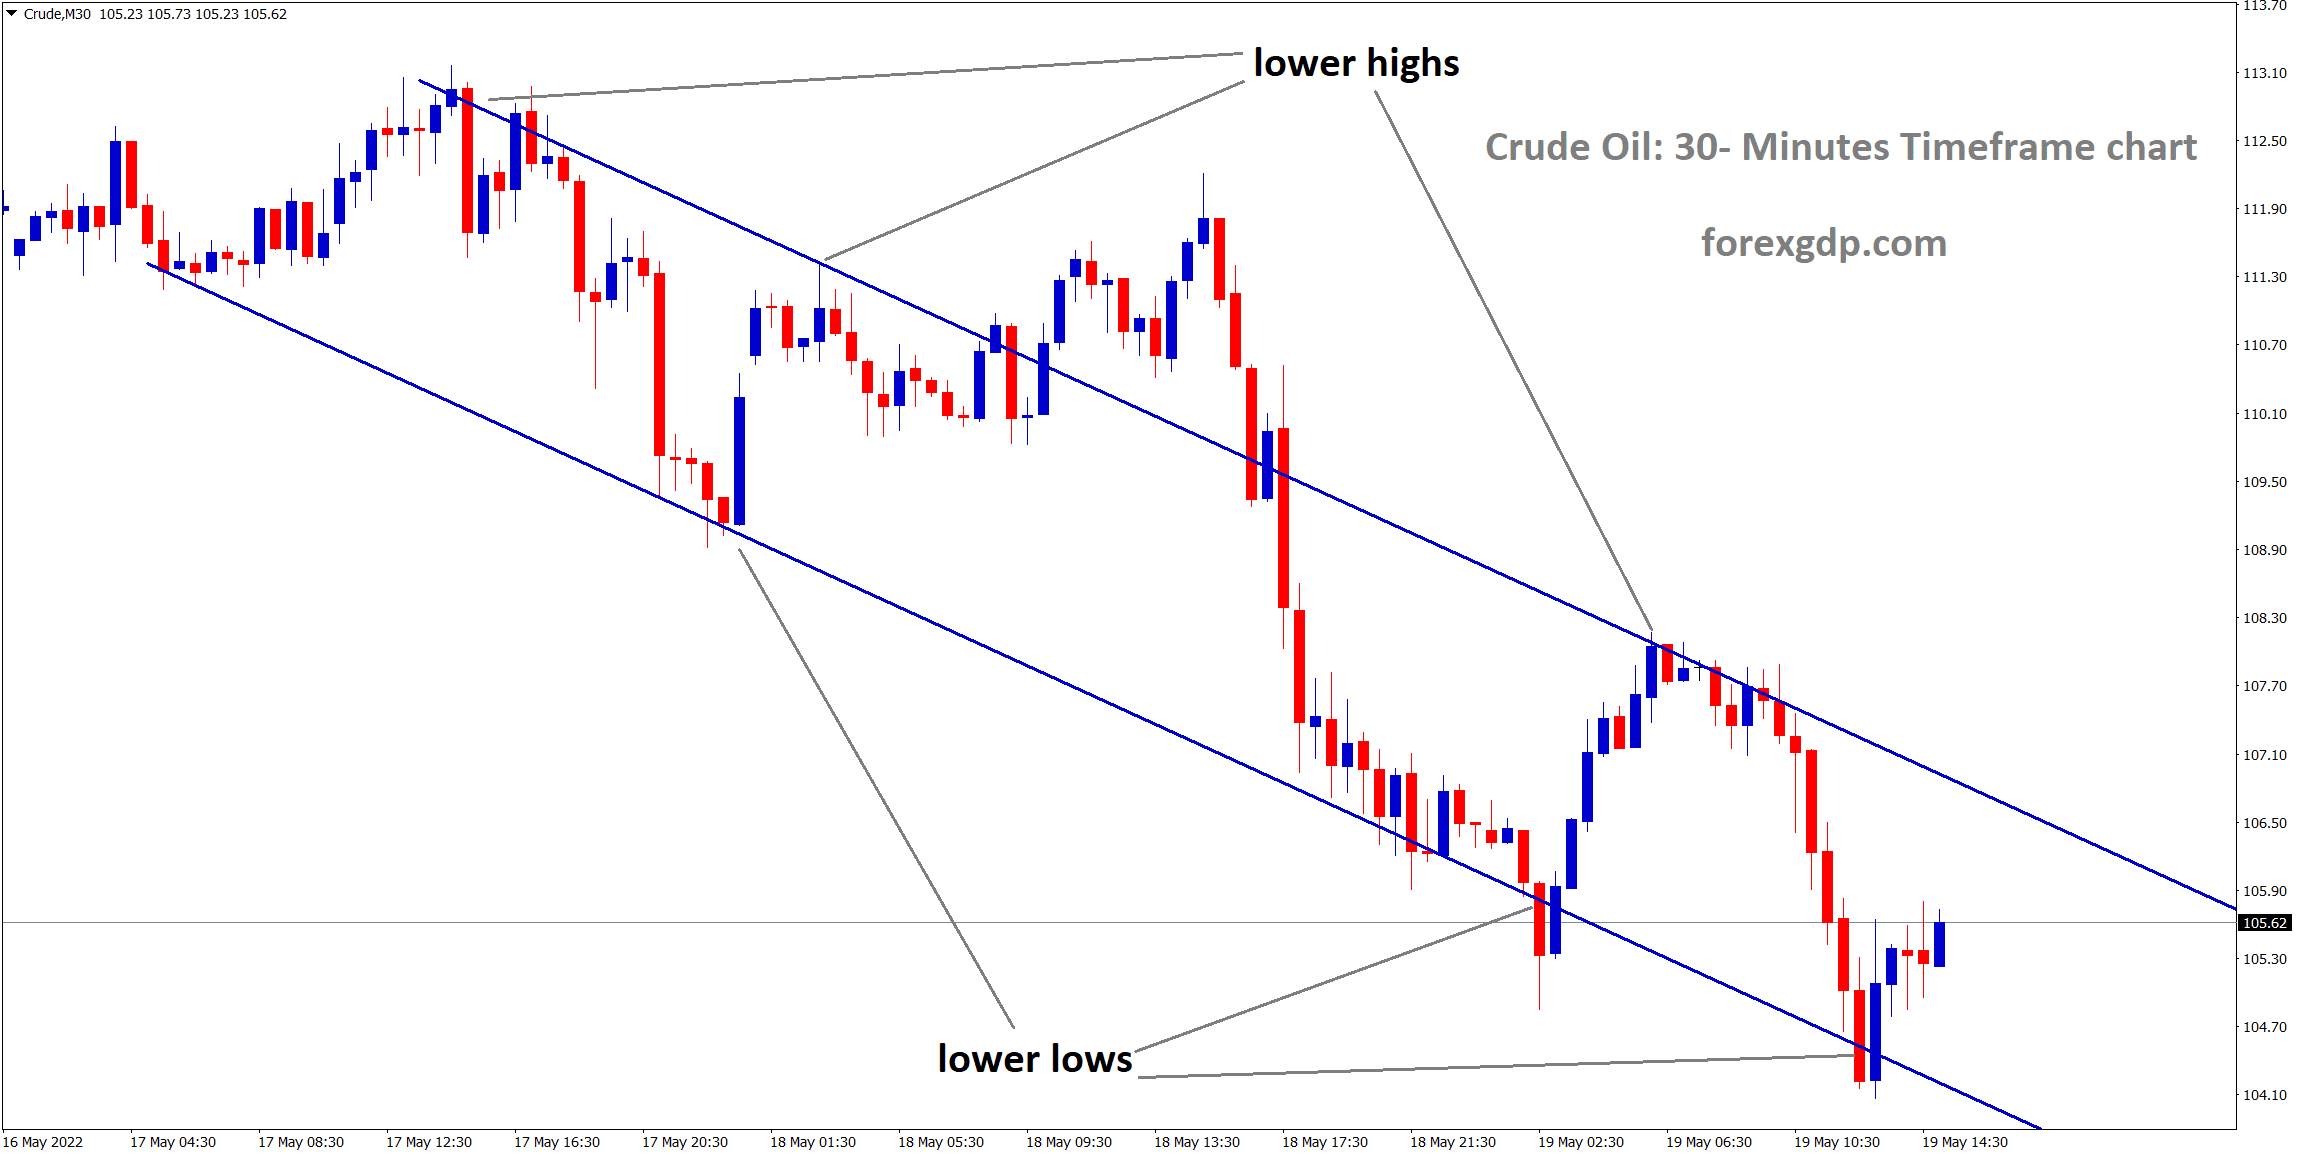 Crude oil is moving in a desceding channel and the market has rebounded from the lower low area of the channel.